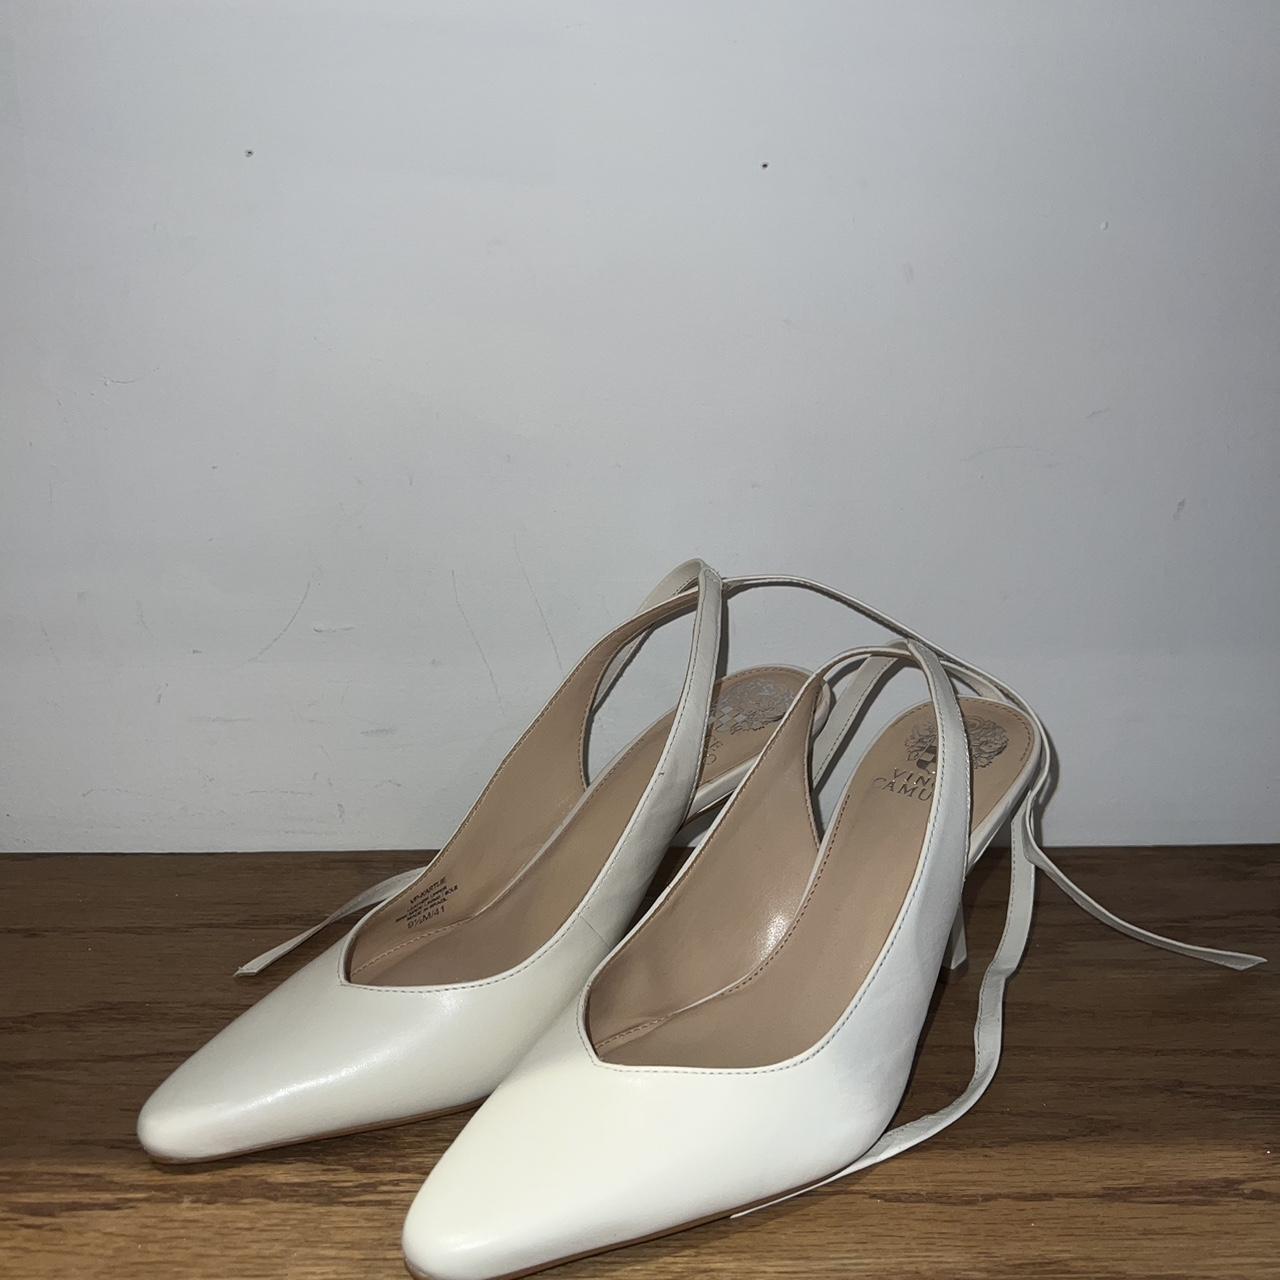 Vince Camuto Women's Cream and White Courts (5)